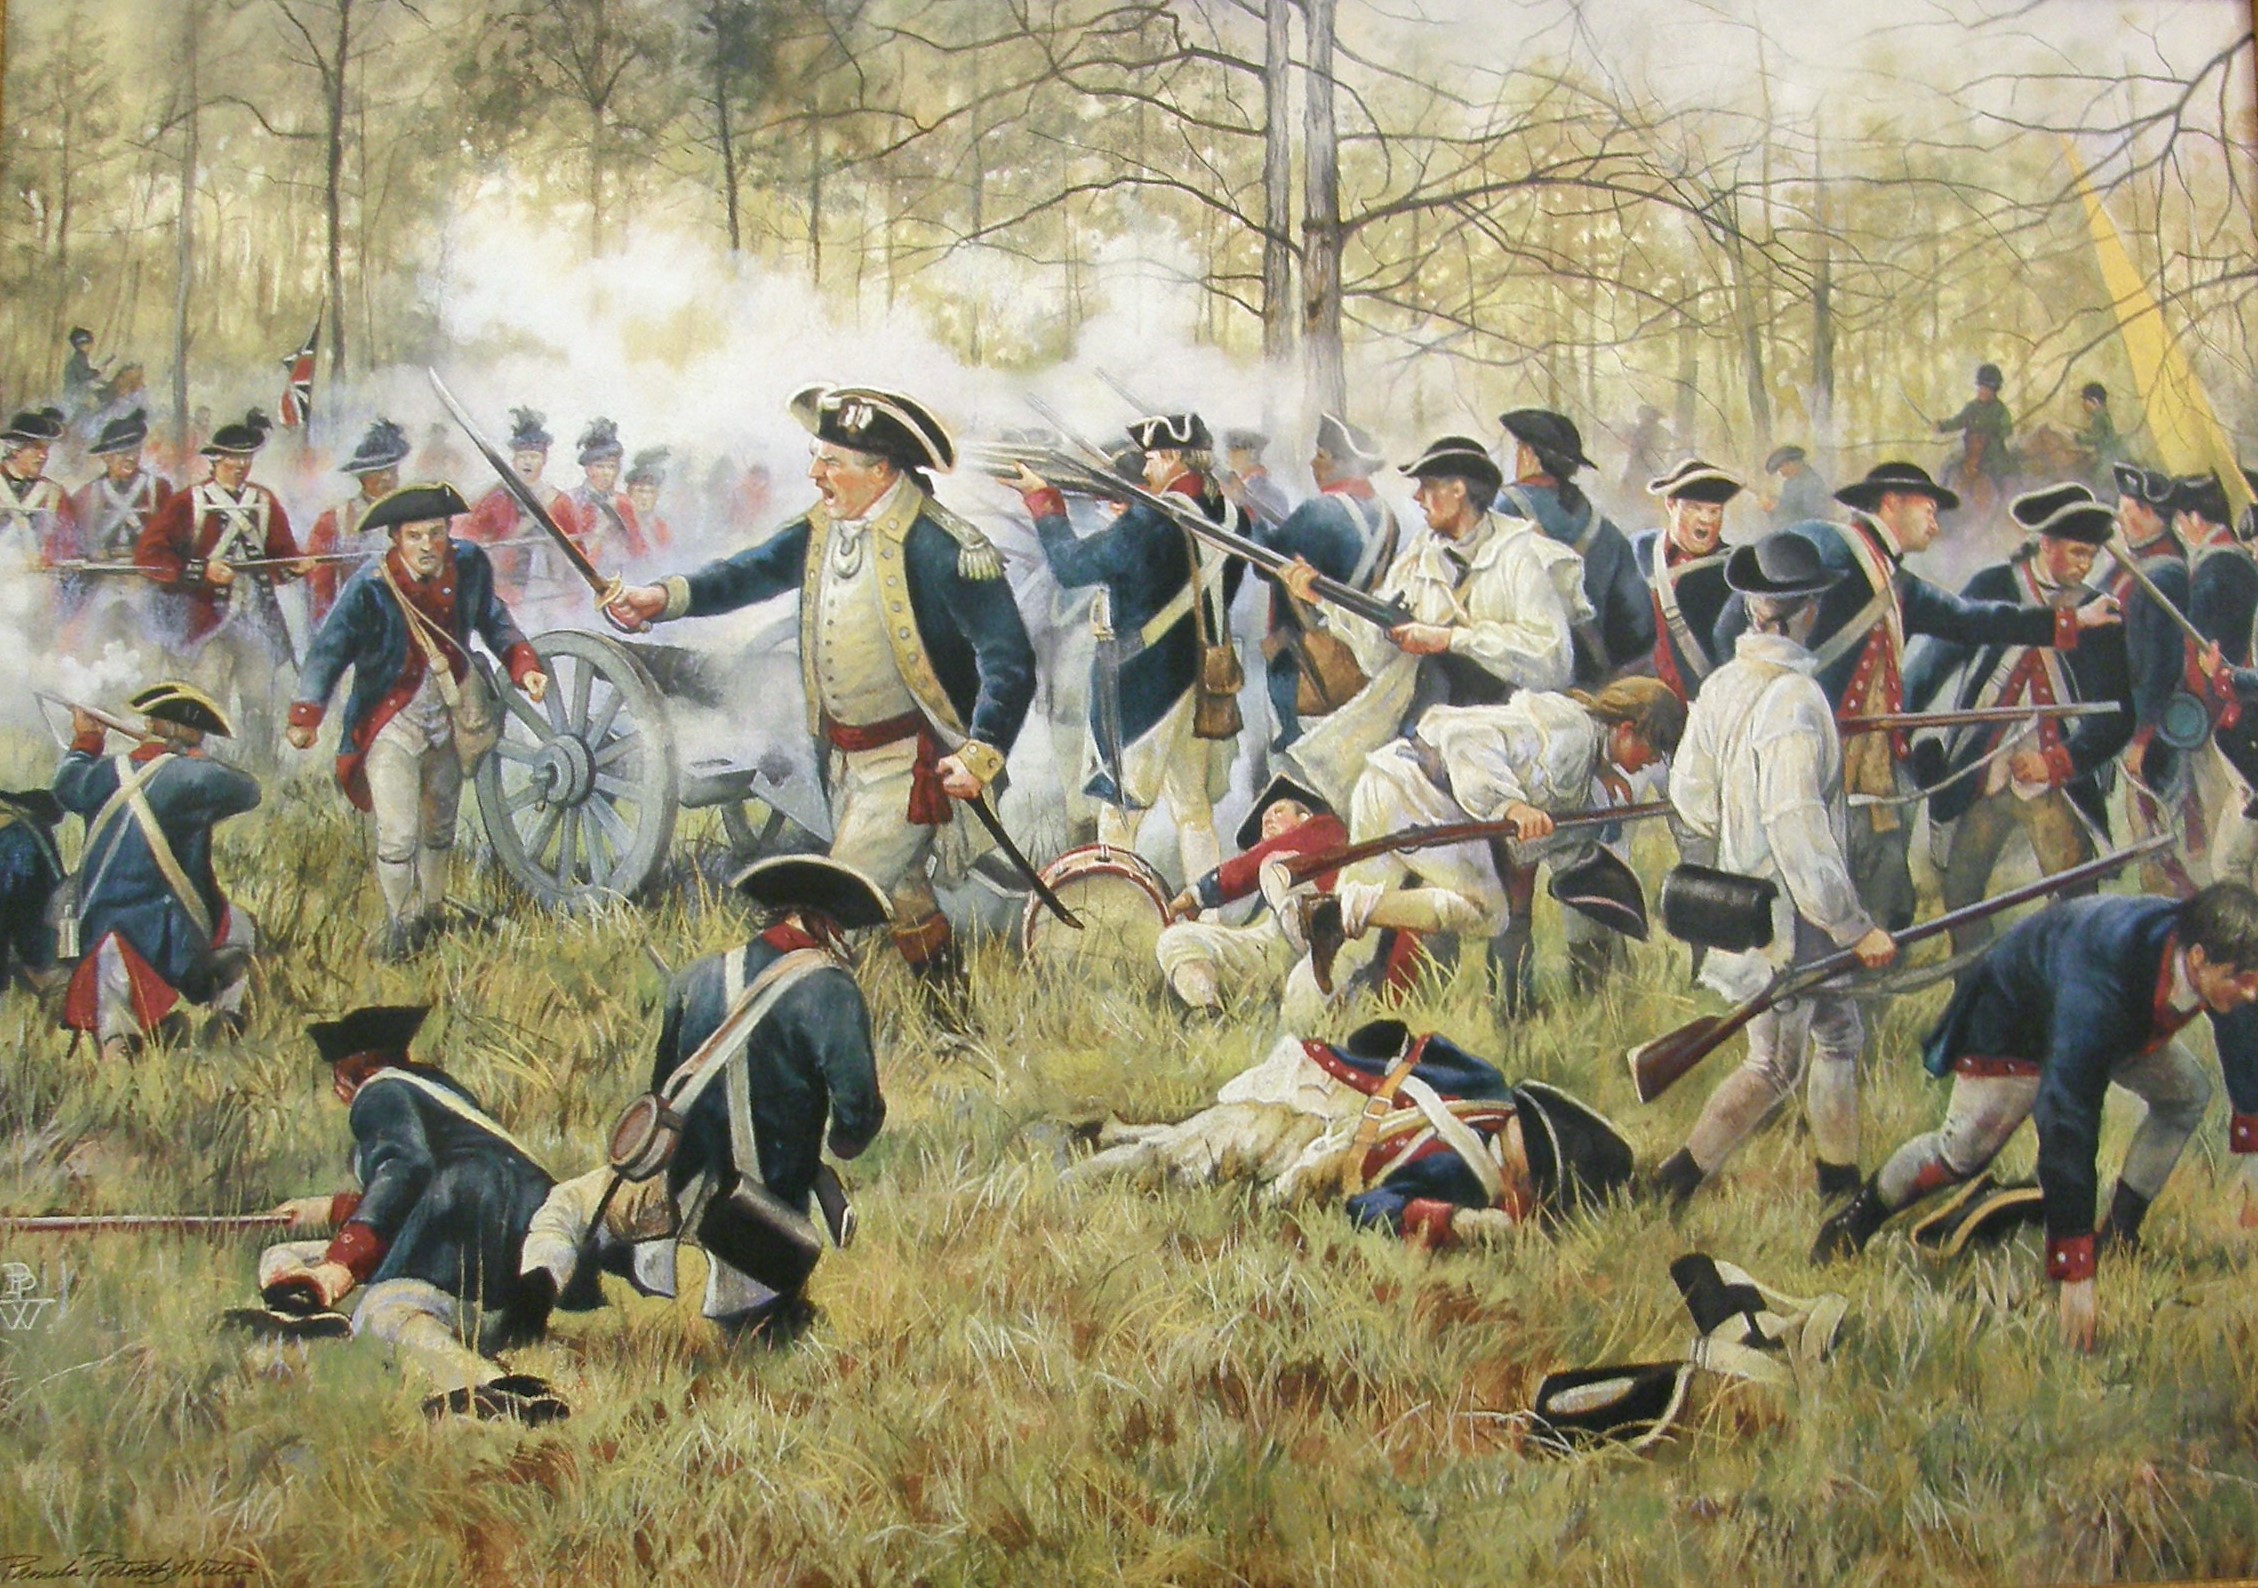 Delaware Society of the Sons of the American Revolution Battle of